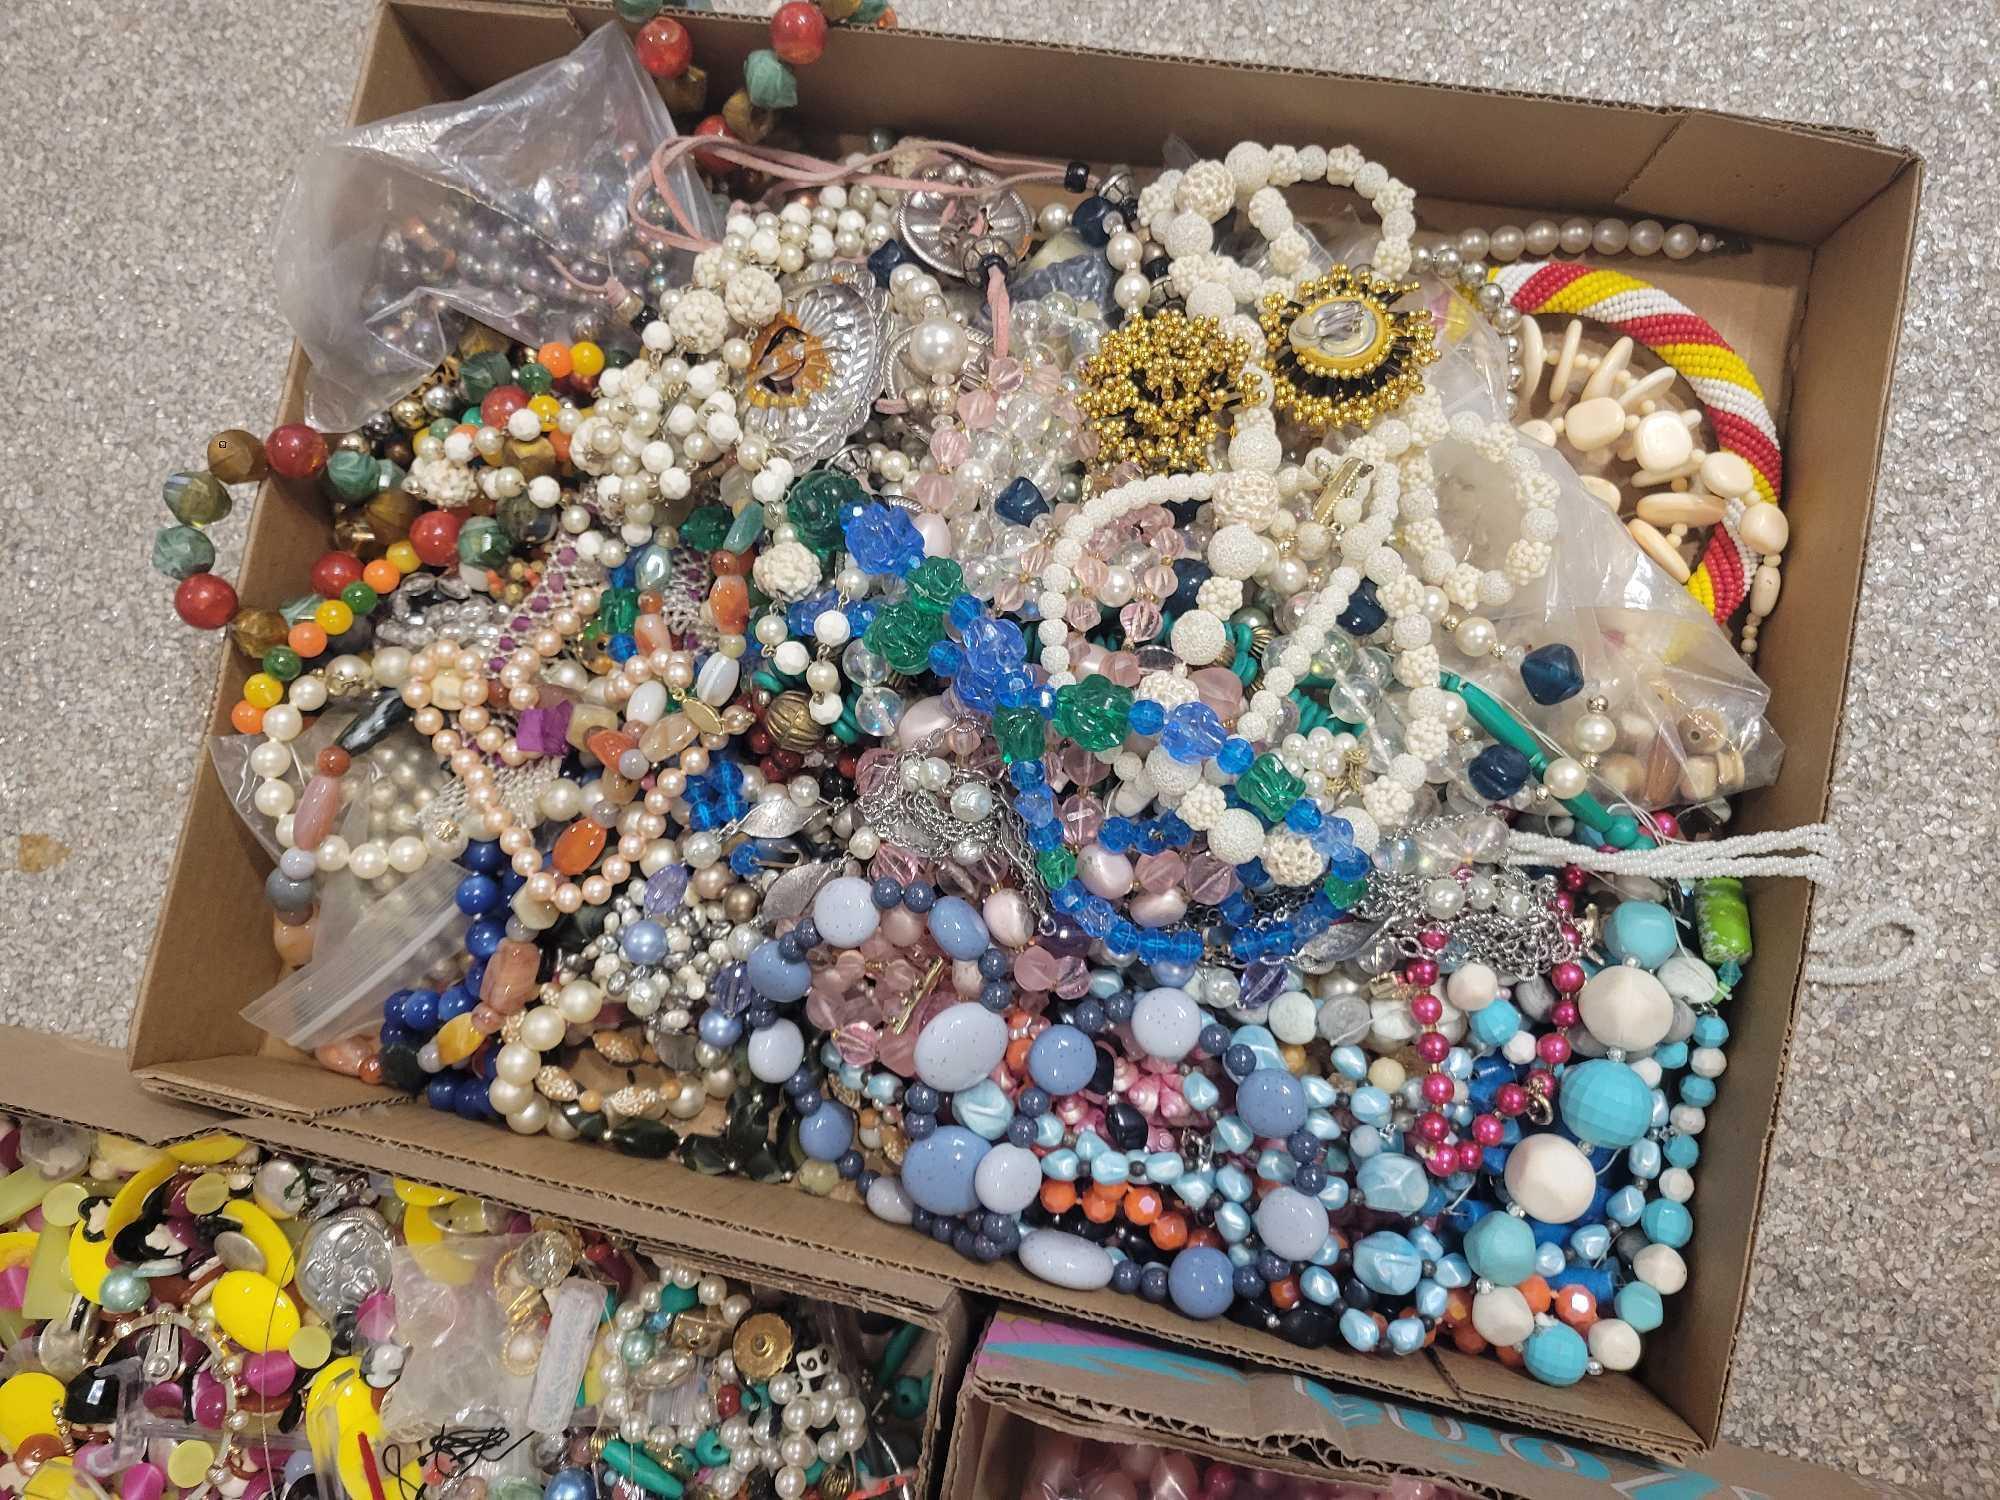 3 Boxes of assorted necklaces, beads, jewelry making supplies and parts